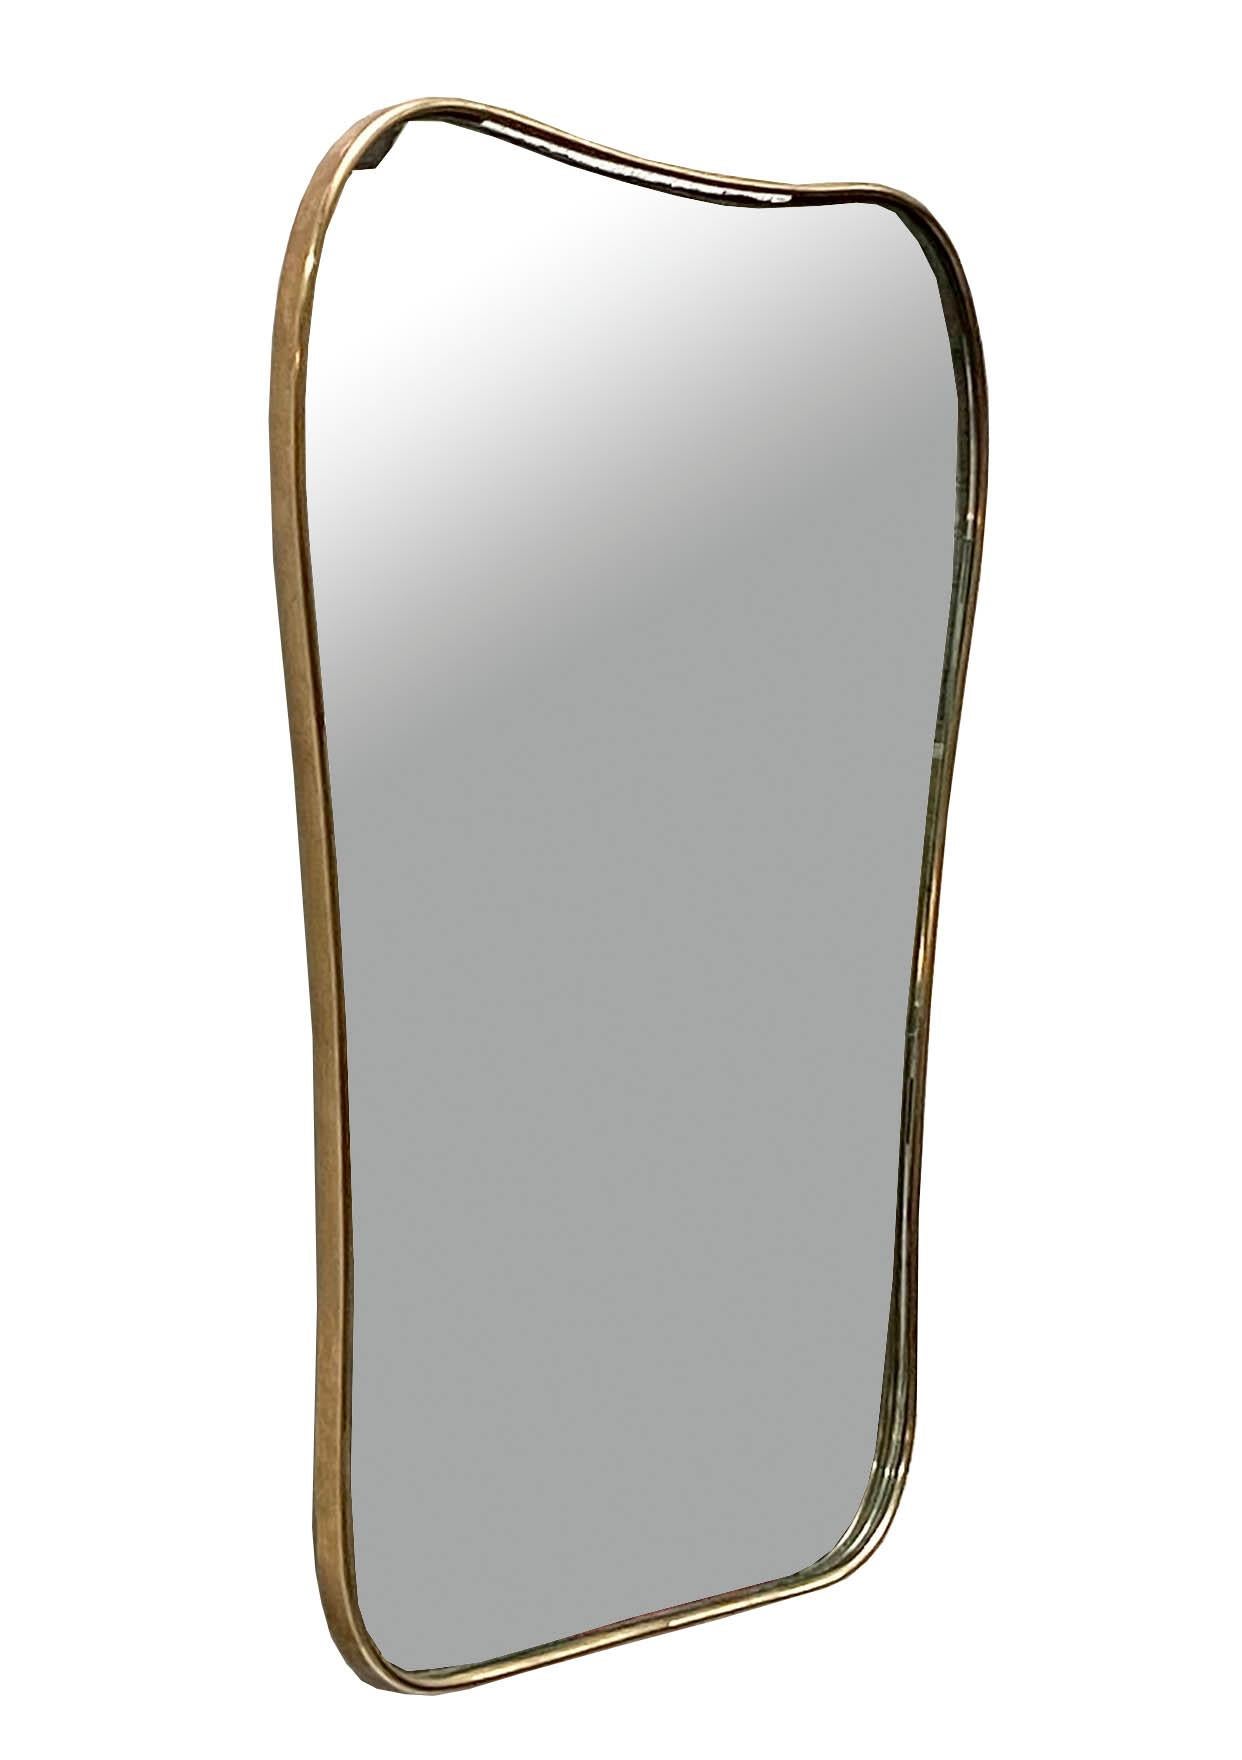 Beautiful Italian brass mirror from circa 1960s in a beautiful design. The mirrored glass is original, and the piece is stylistically related to the work of noted designer Giò Ponti.
The gentle, well-proportioned shape gives this mirror a touch of